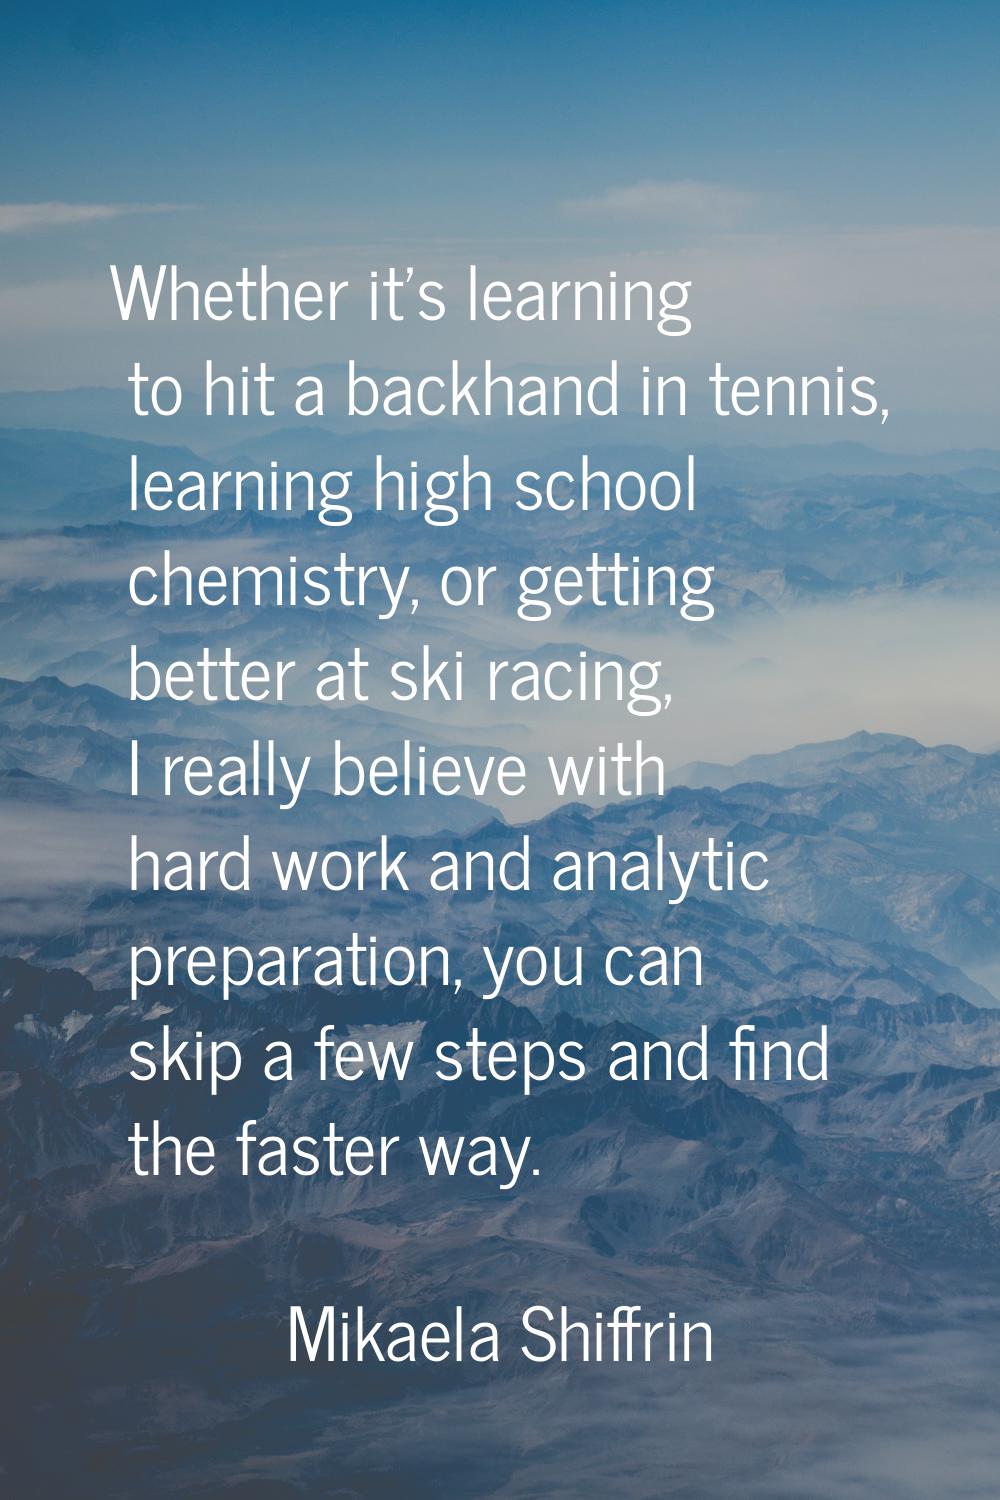 Whether it's learning to hit a backhand in tennis, learning high school chemistry, or getting bette